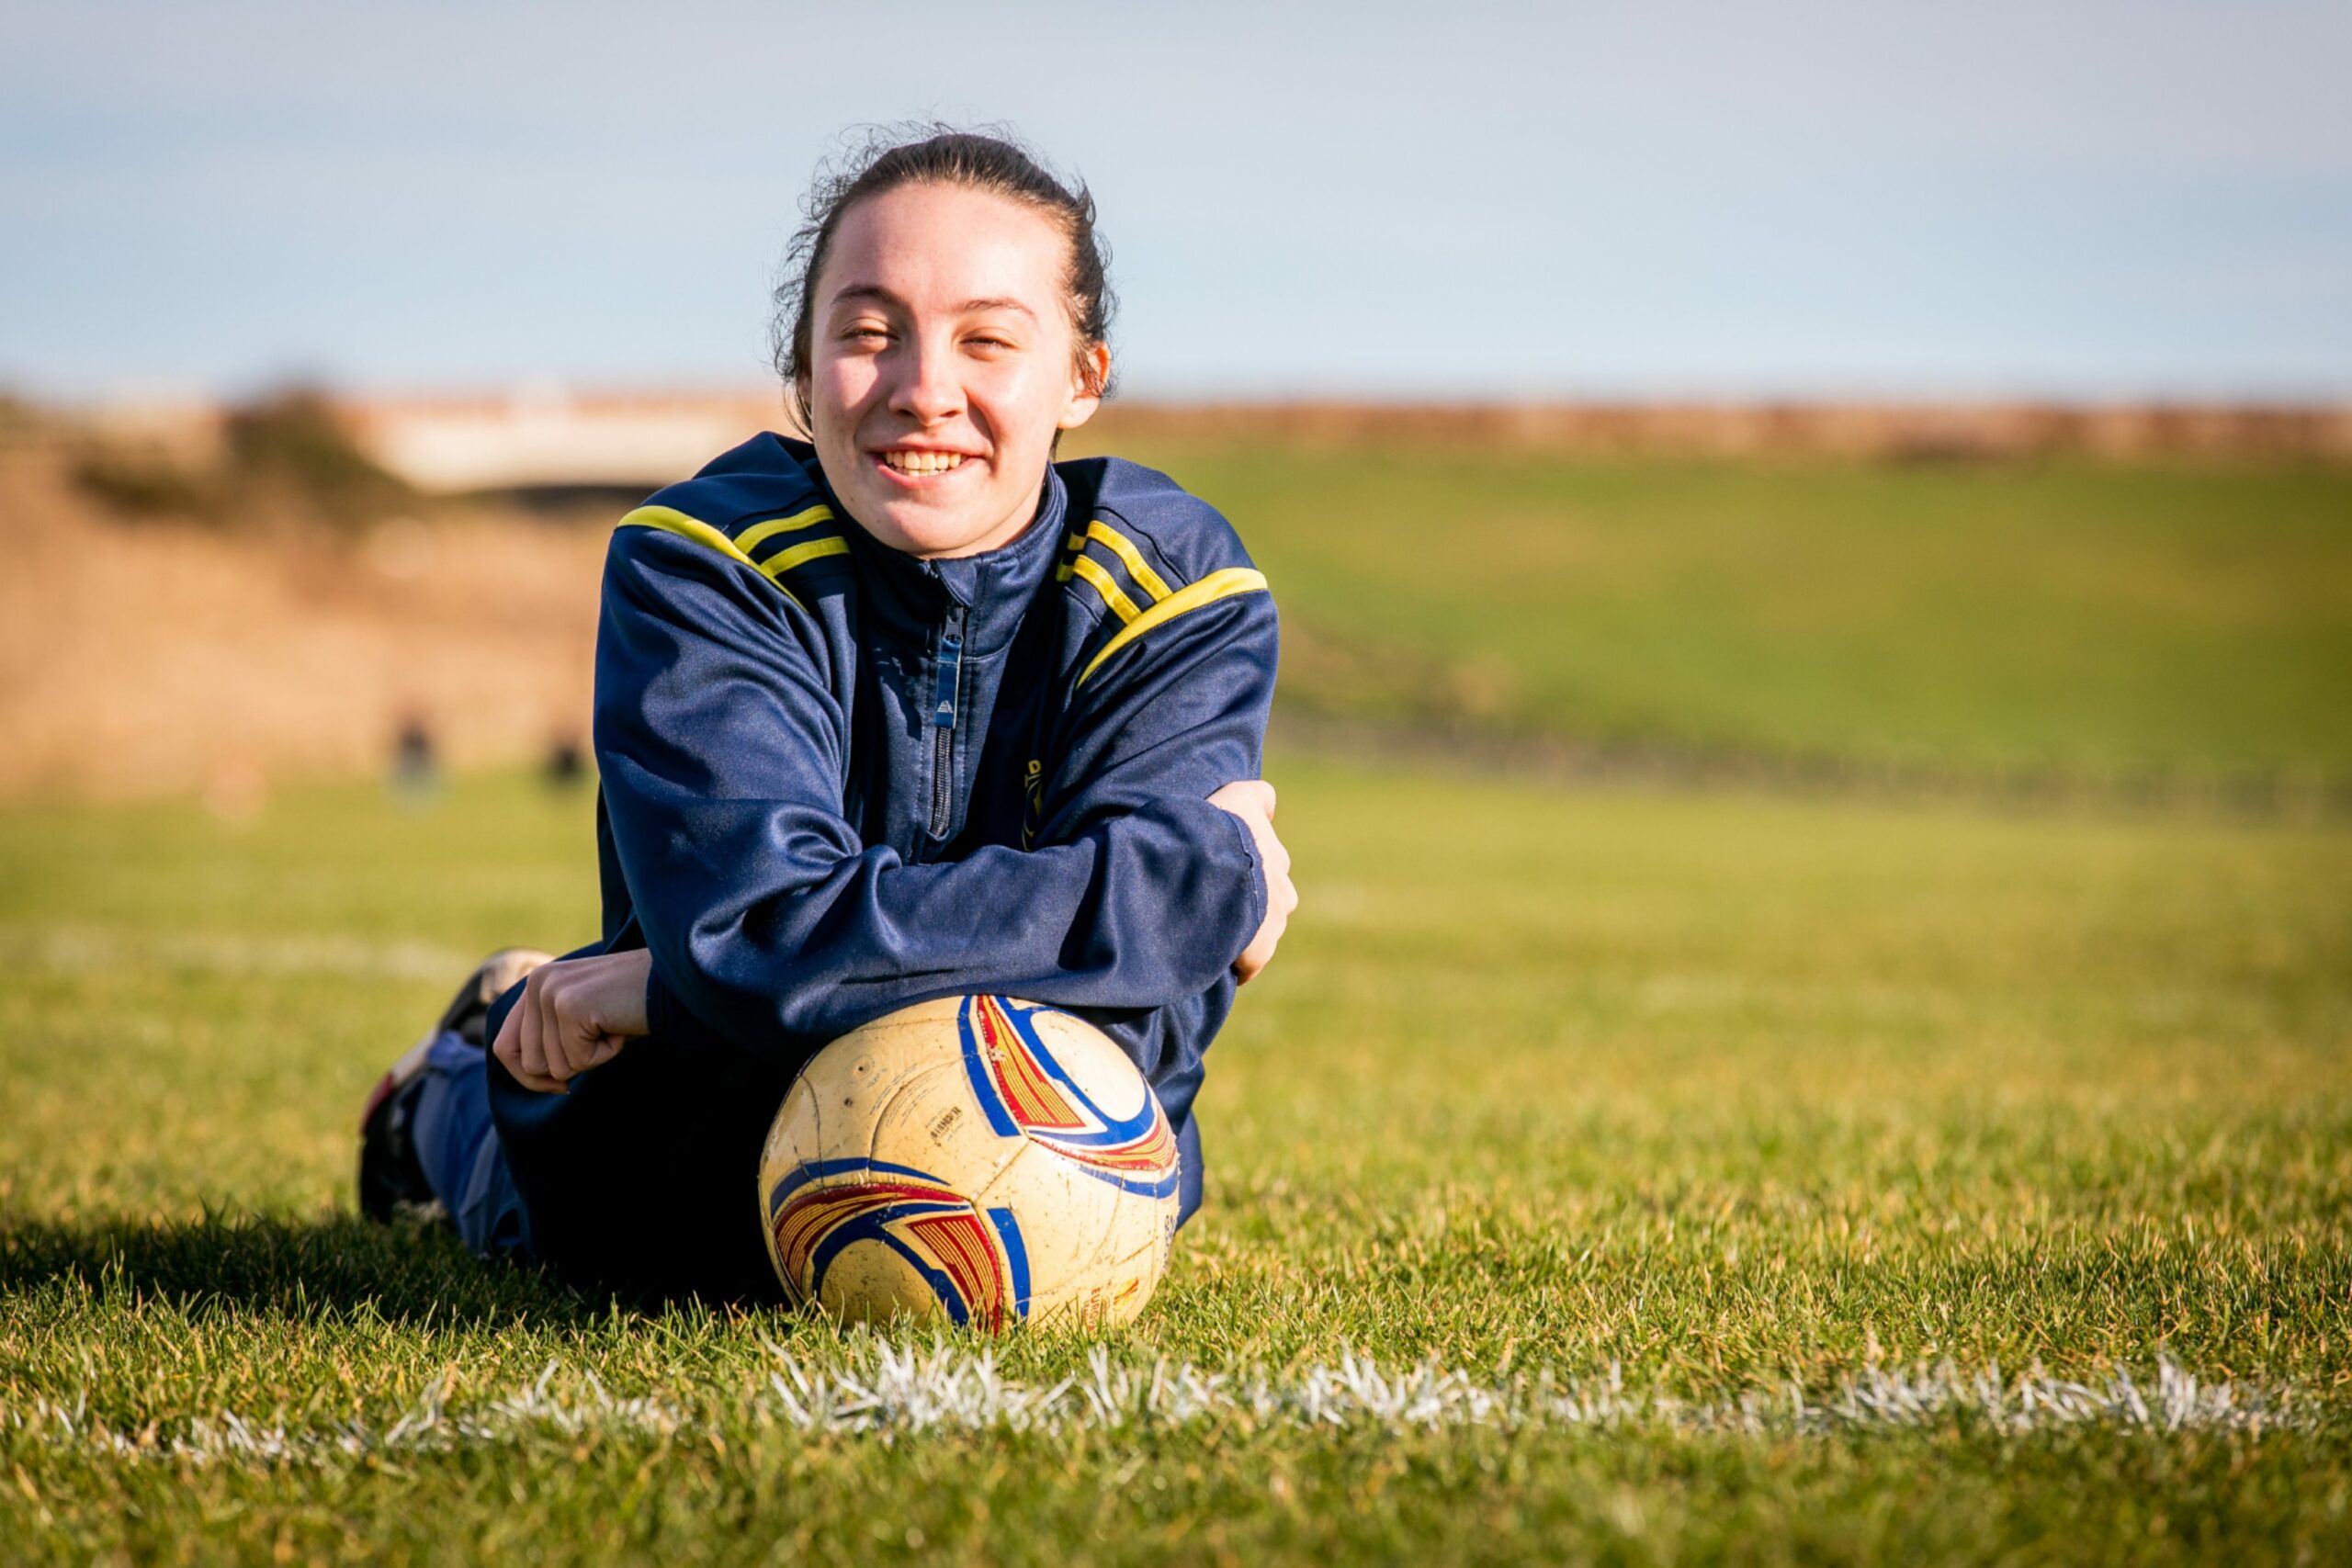 Ellie Cook is the founder of Arbroath Community Sports Club Girls 